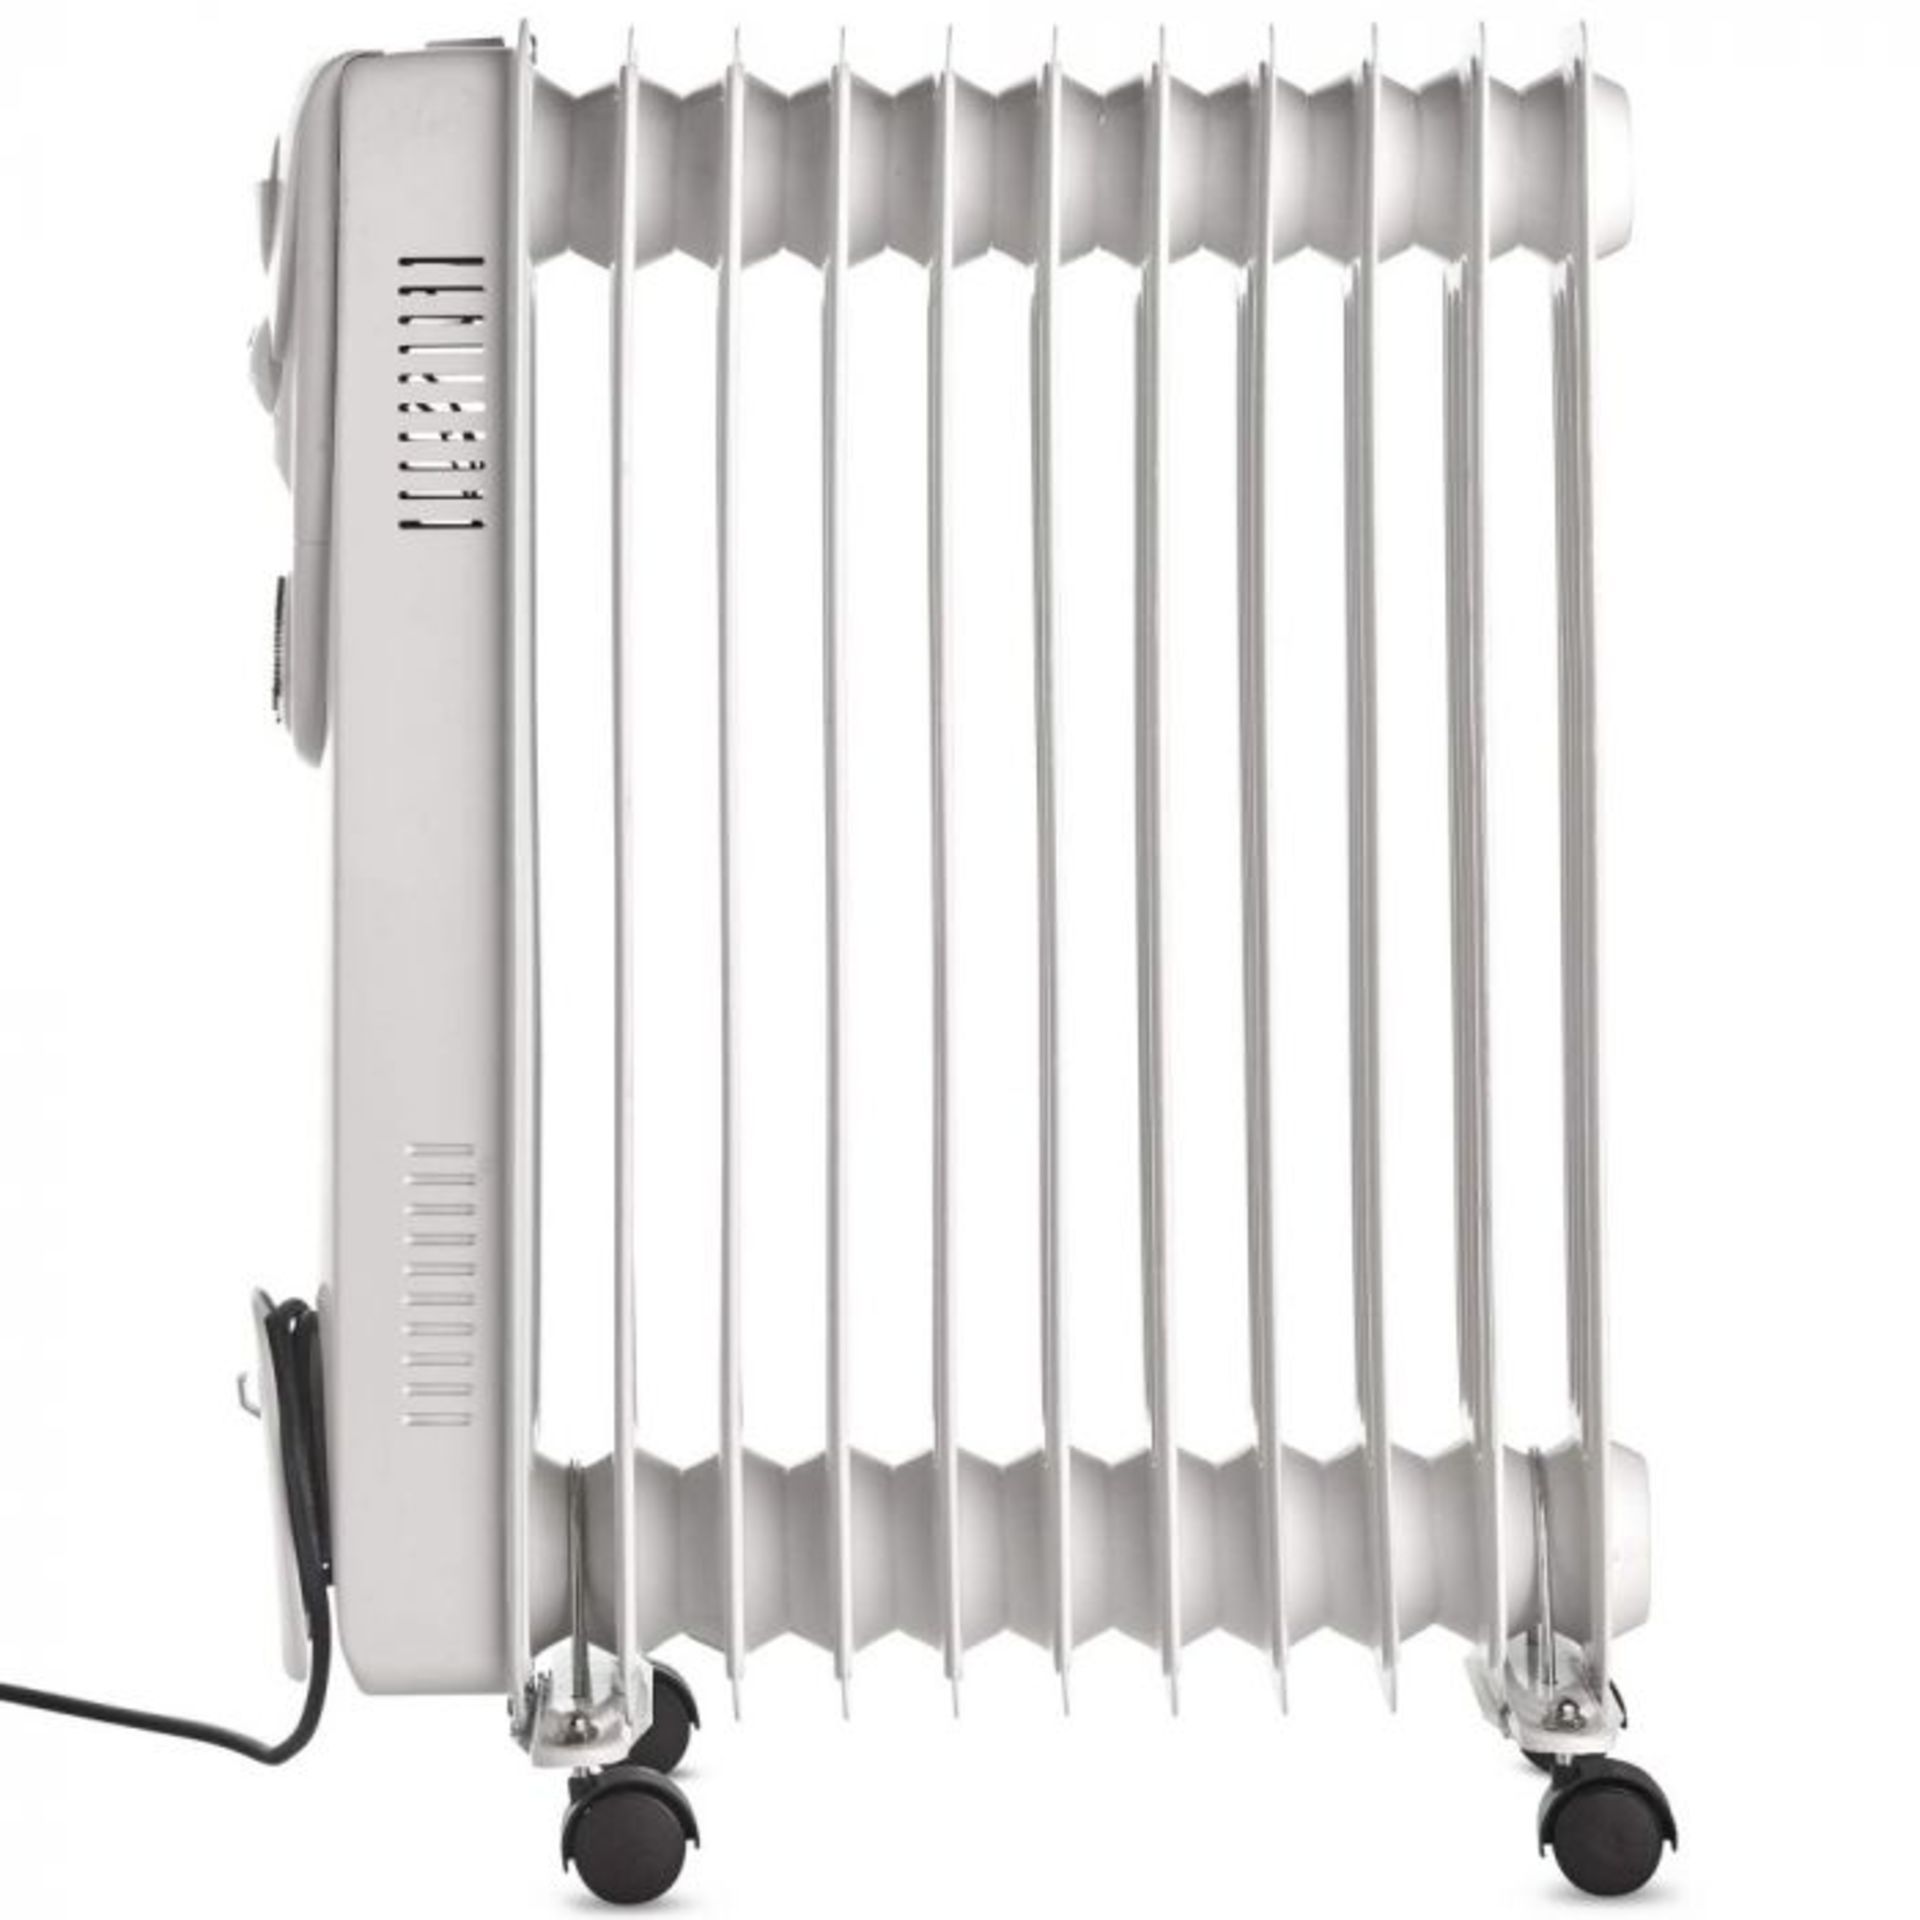 (V145) 11 Fin 2500W Oil Filled Radiator - White Suitable for areas up to 28 square metres 3 p... - Image 3 of 3